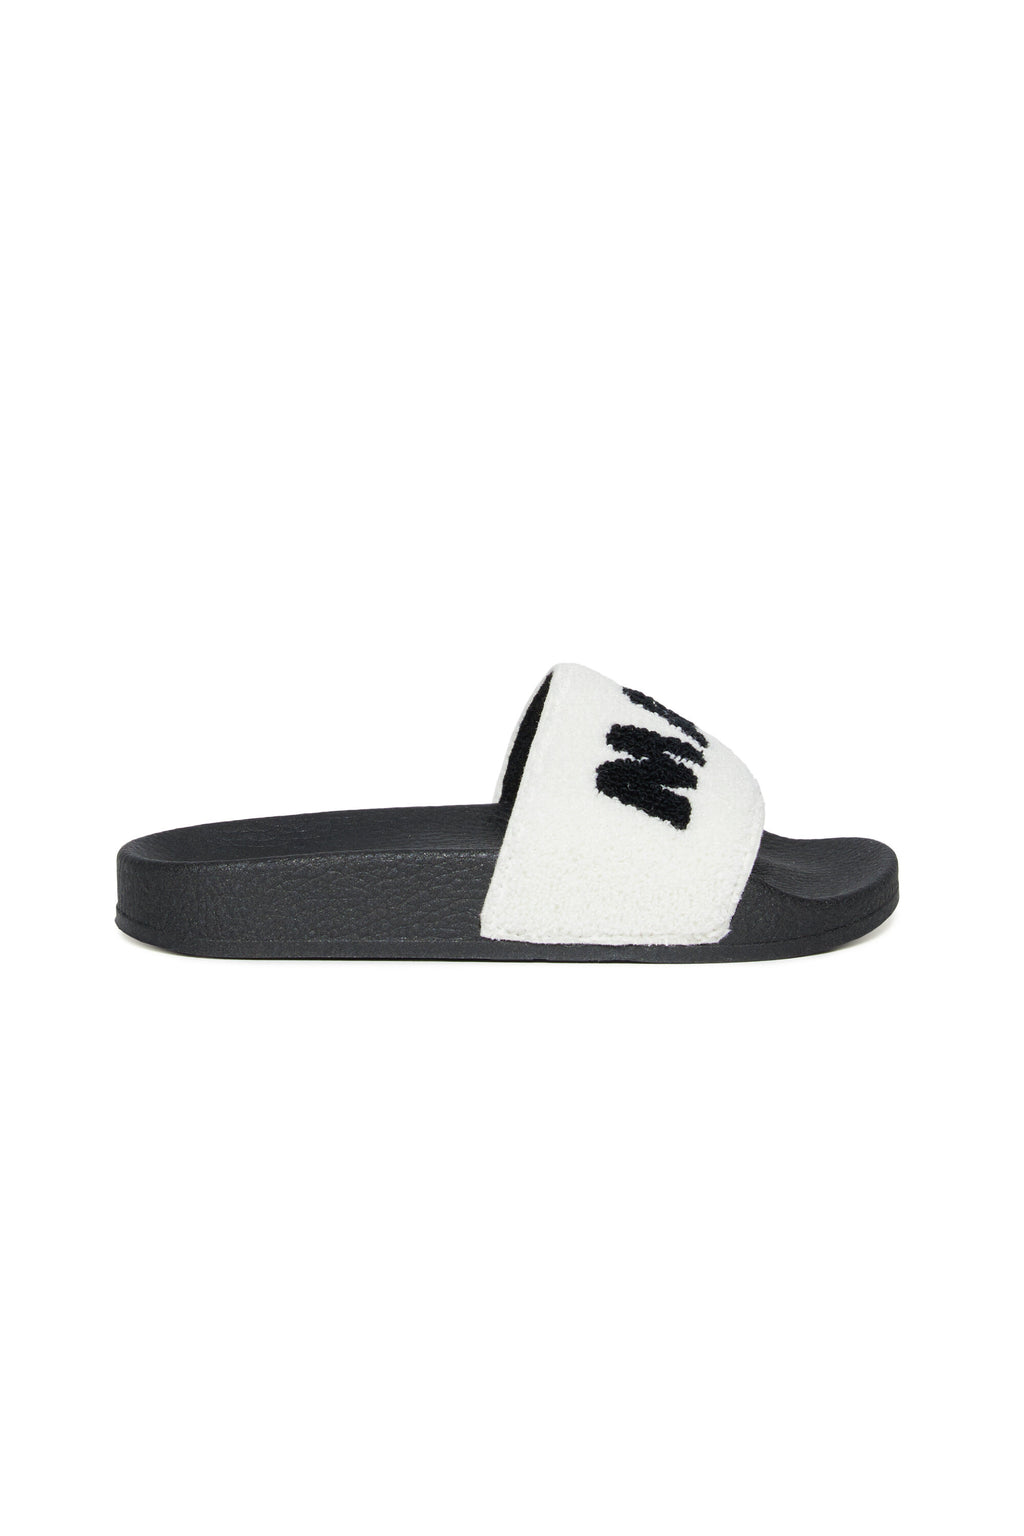 Branded terrycloth slide slippers